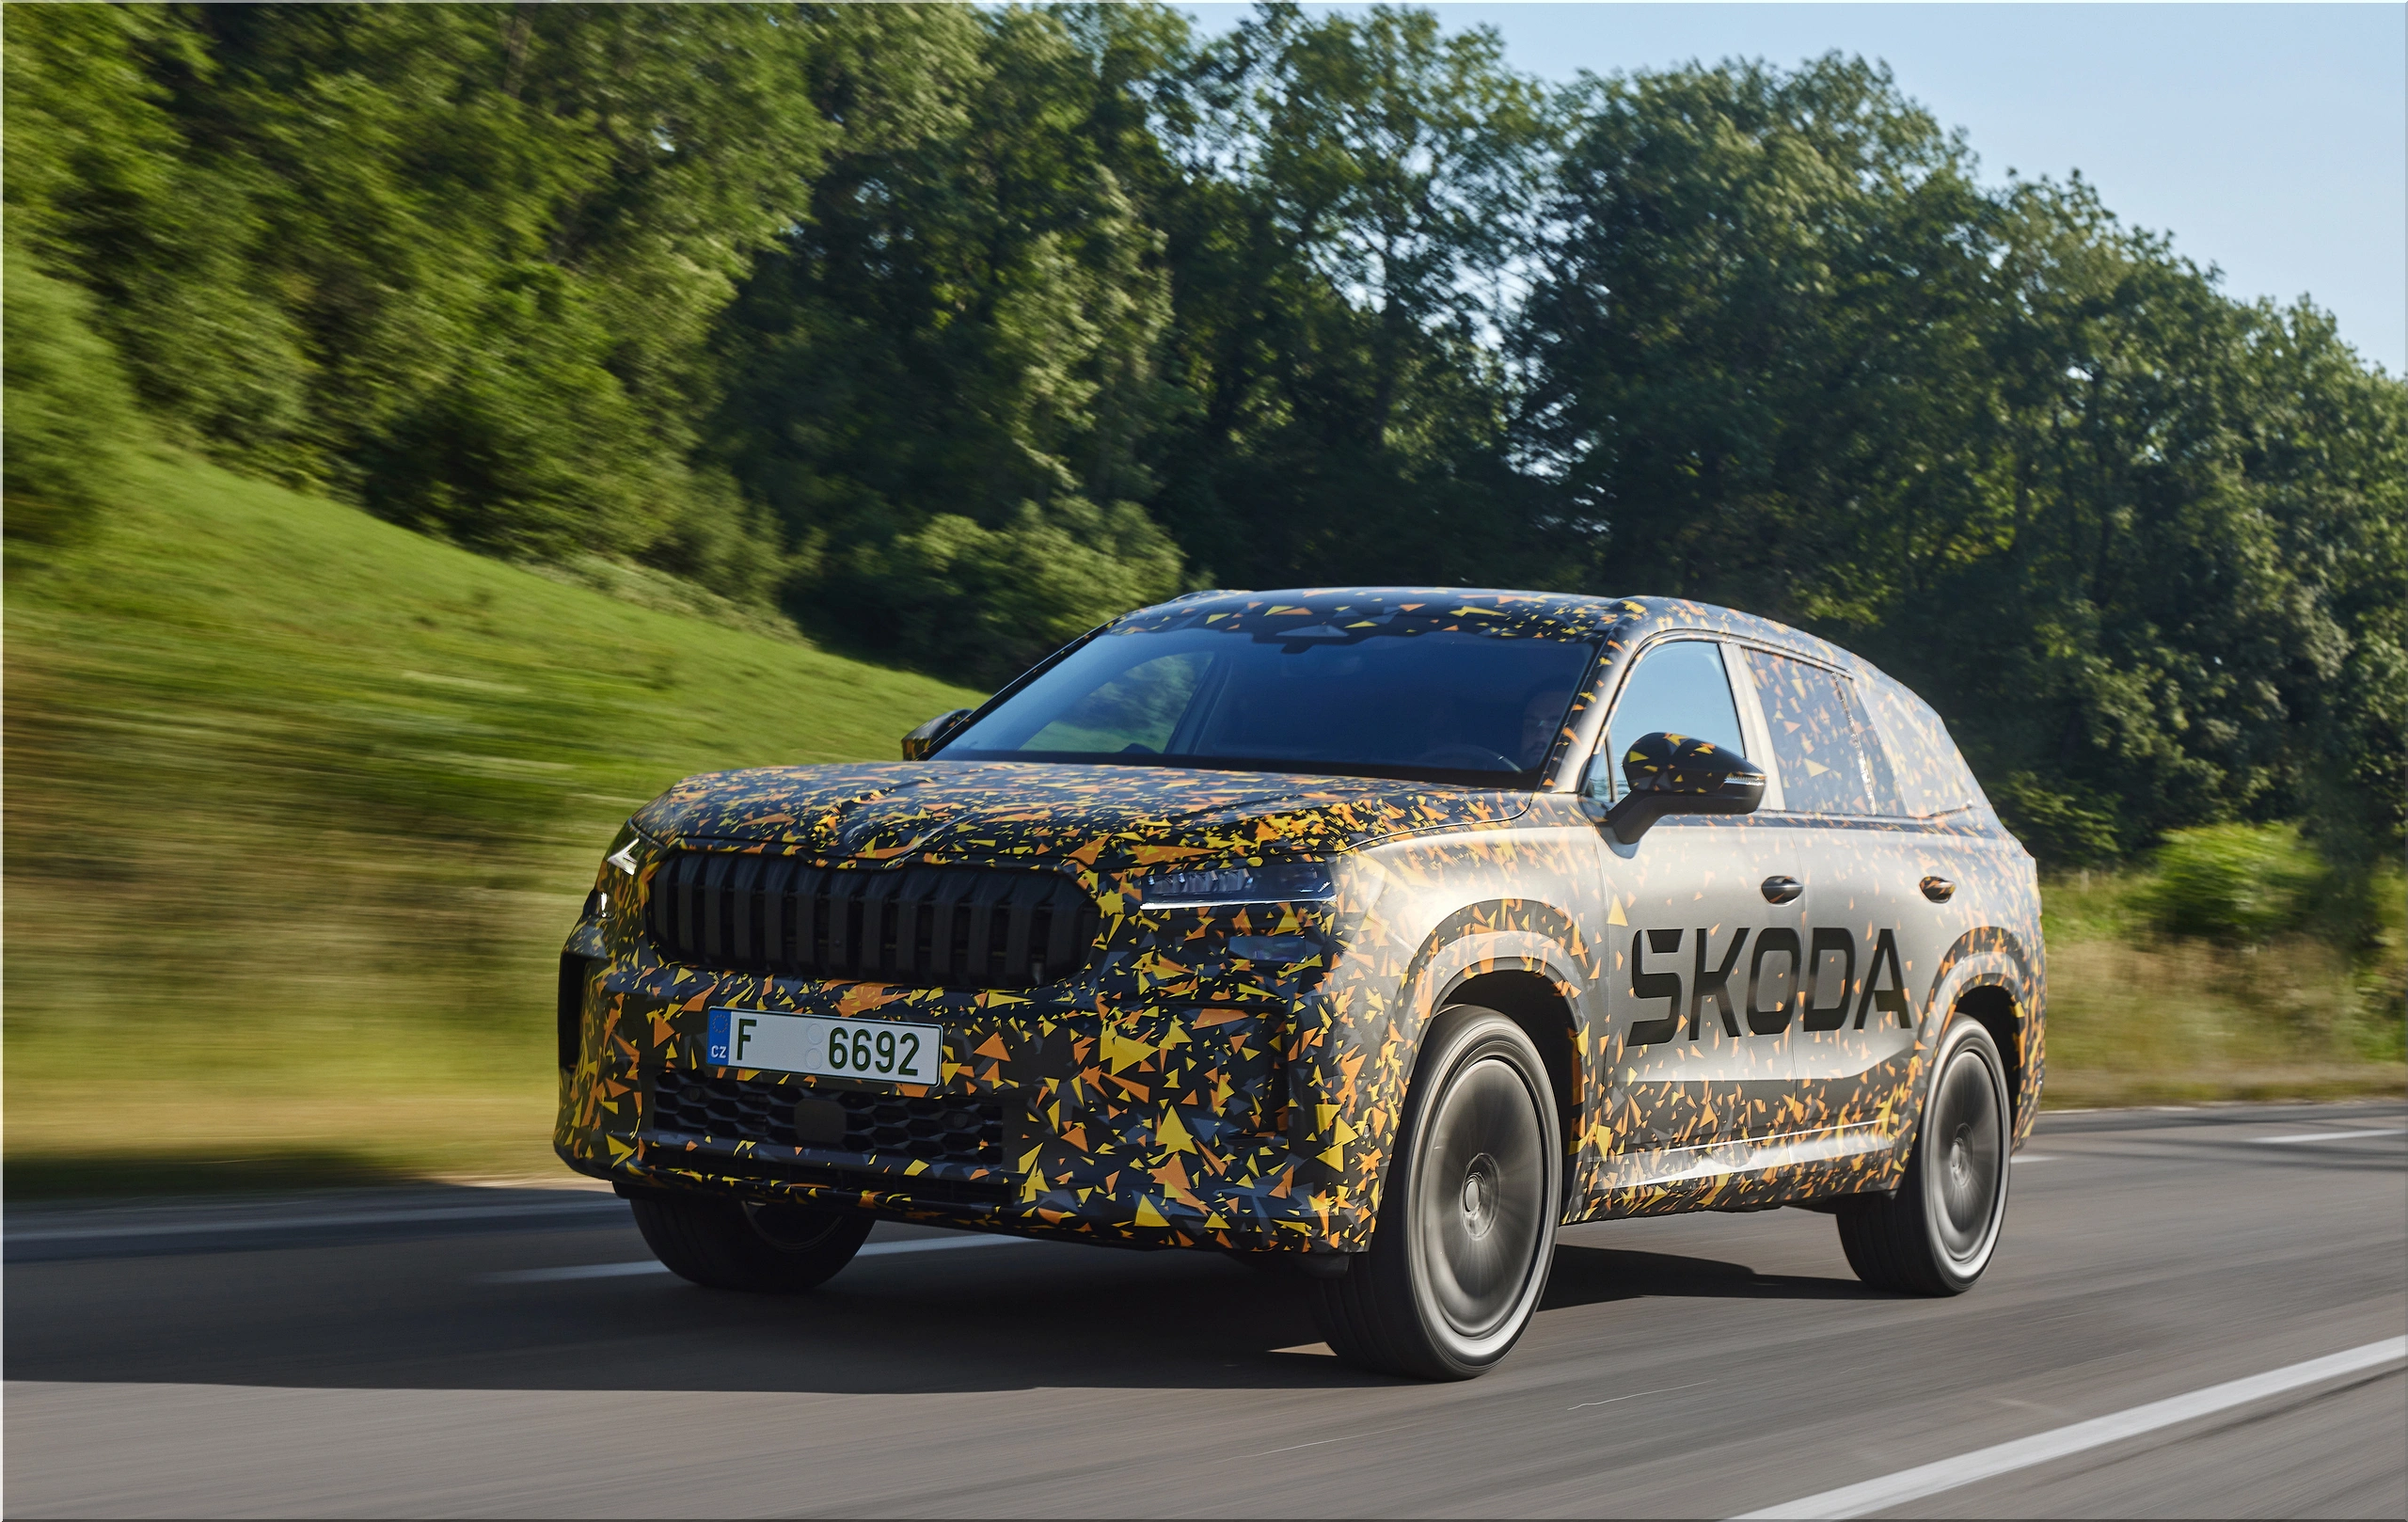 The new Skoda Kodiaq is a plug-in hybrid SUV with a lot of power and style